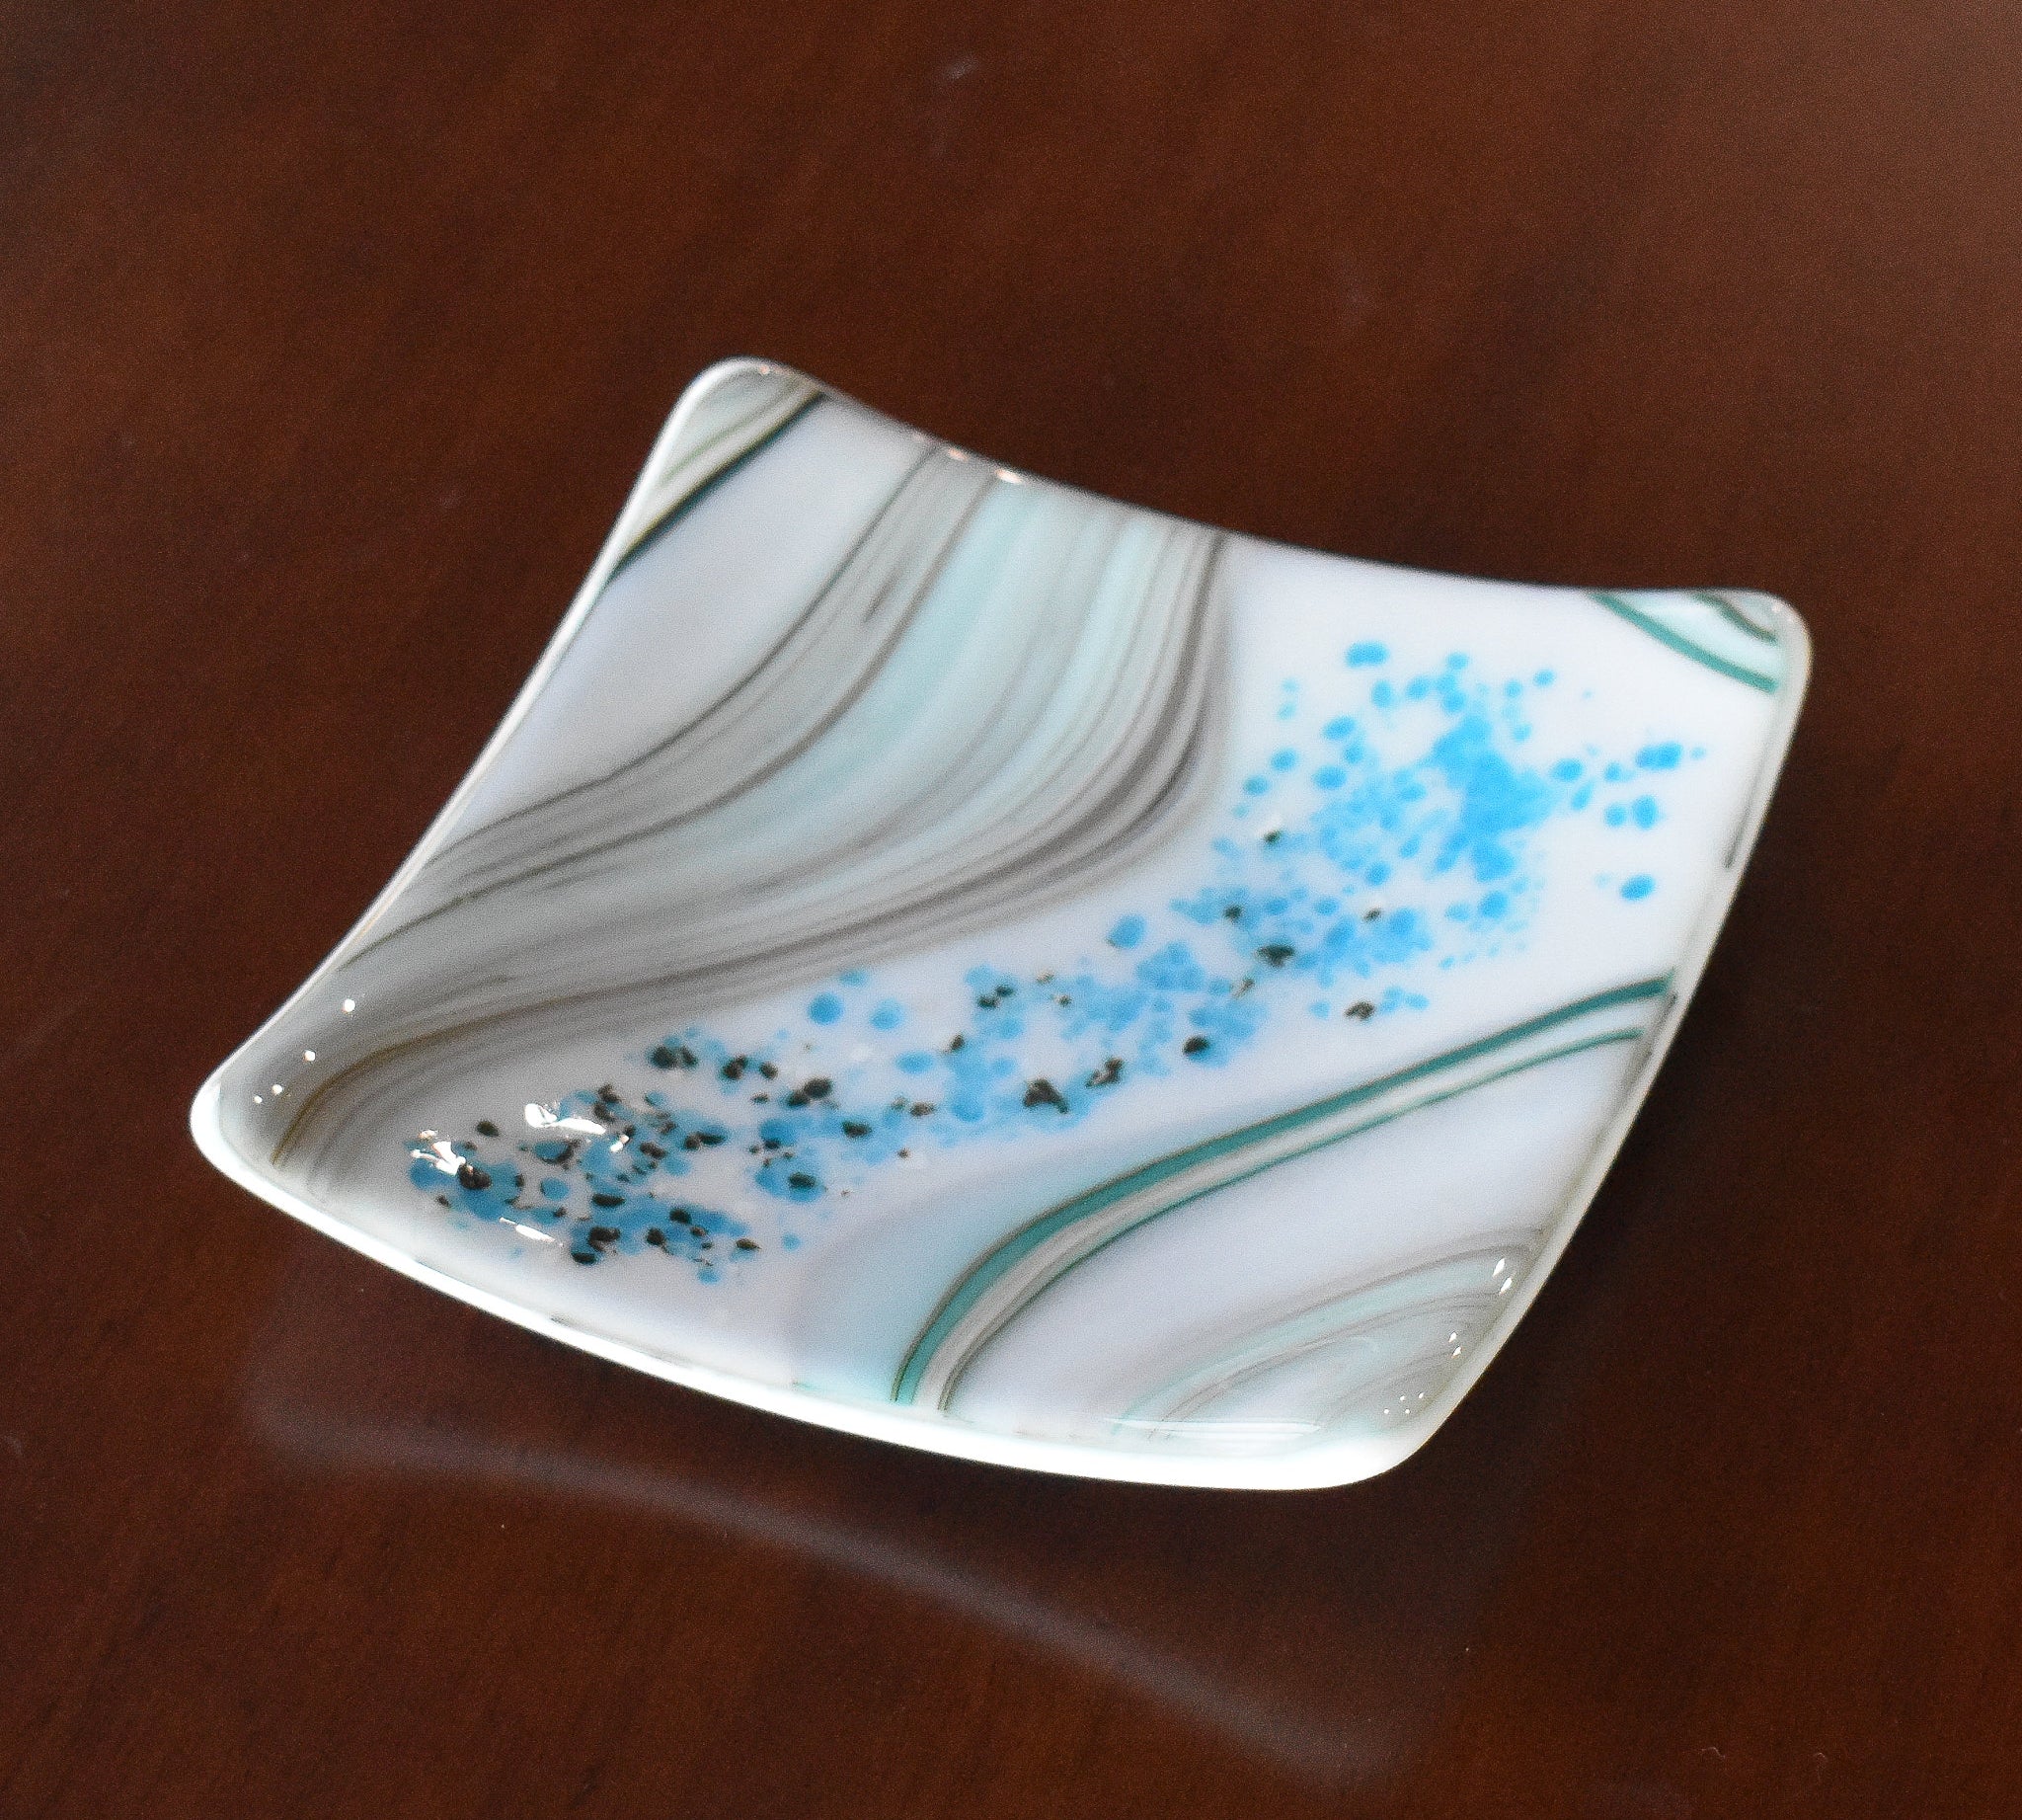 Small 6" Fused Glass Plate or Tray with Swirl Pattern makes a great Catchall Tray or Food Serving Dish